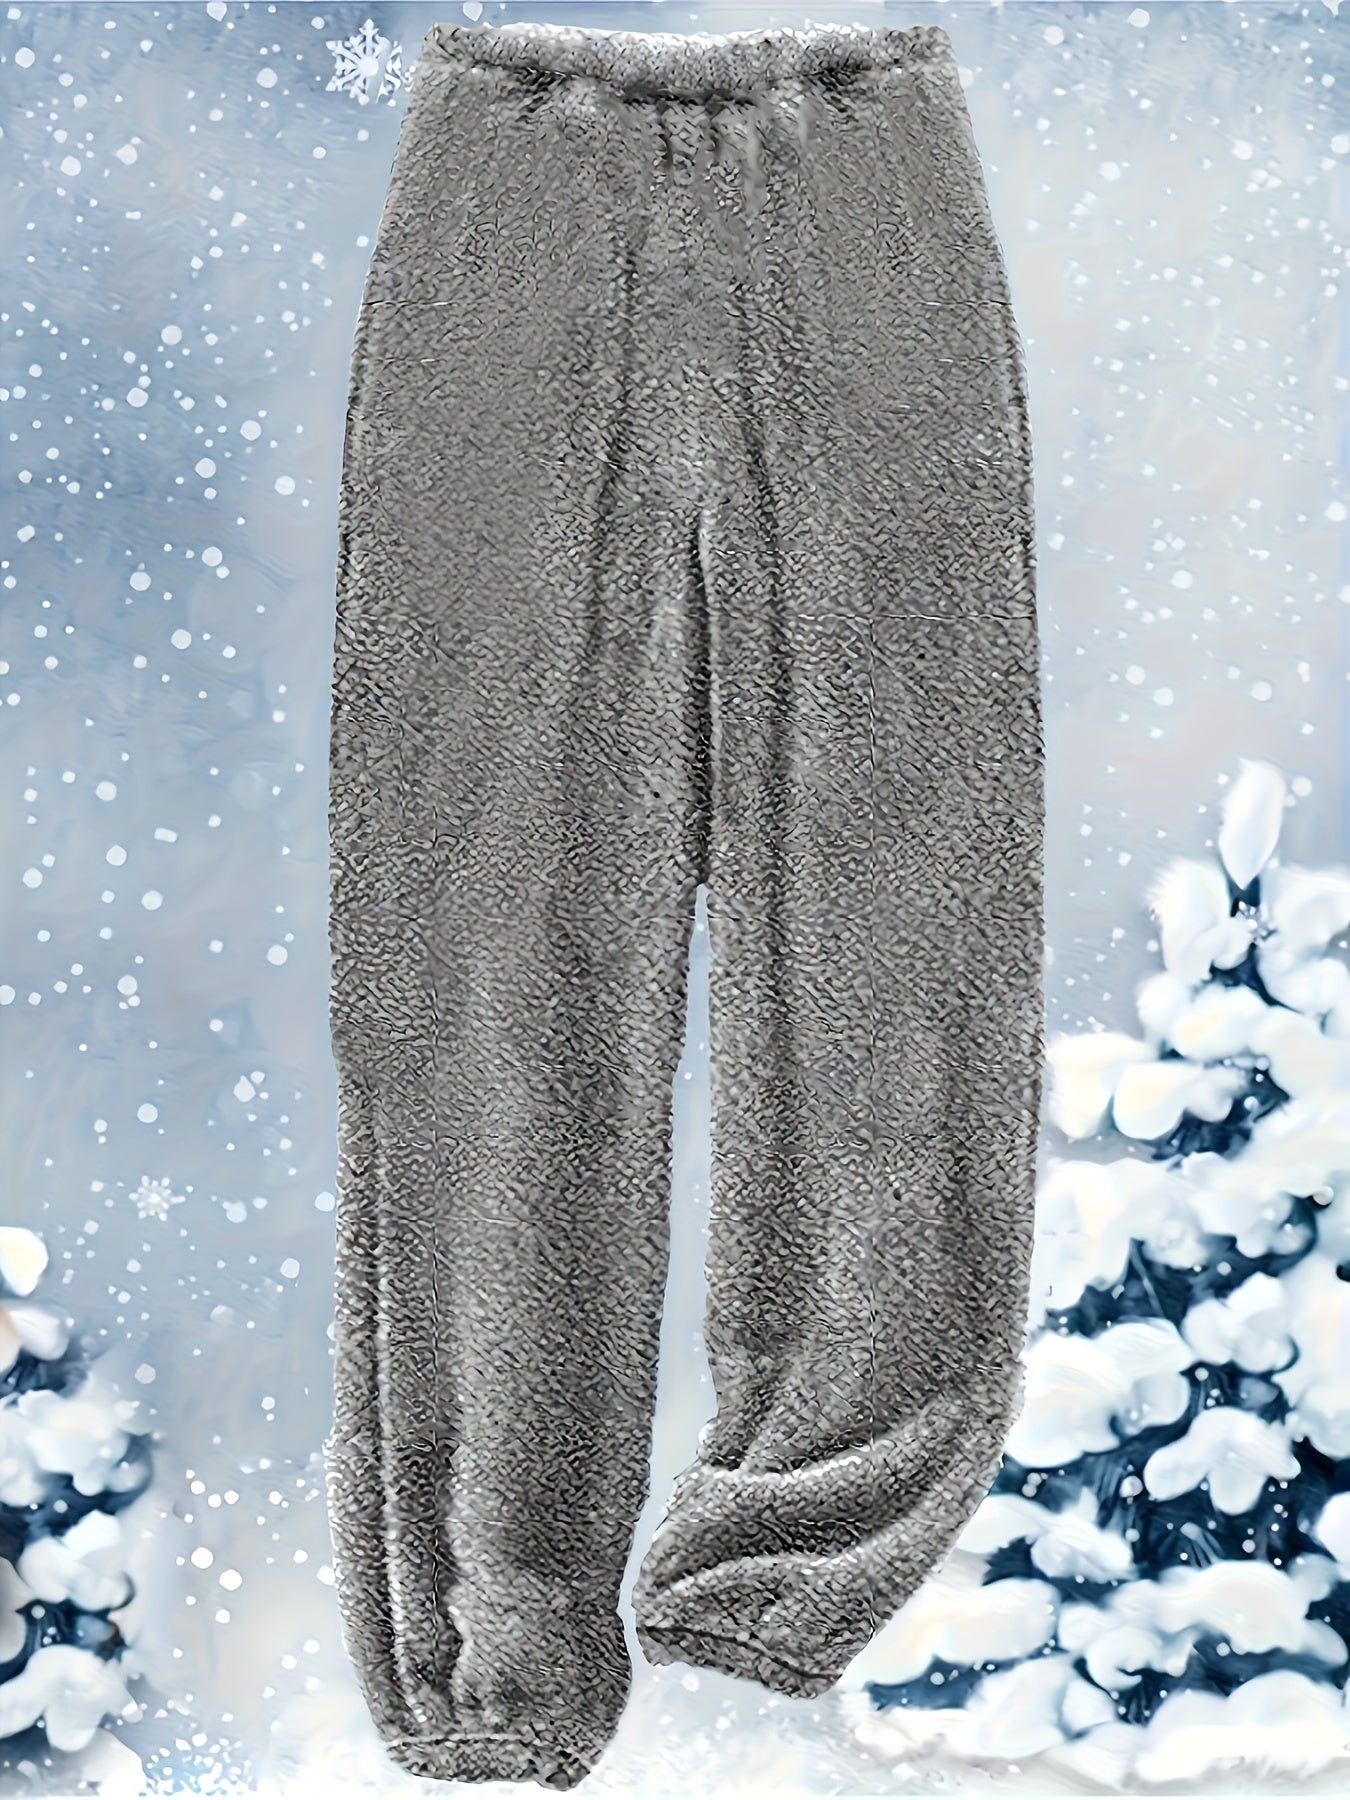 A Fuzzy Casual Two-piece Set, Letter Pattern Button Decor Hoodie & Pants Outfits is displayed against a snowy, winter-themed background. The casual pants appear to have an elastic waistband and are made from a plush polyester fabric. The solid color design enhances their versatile appeal for cozy winter days. This stylish ensemble is brought to you by Maramalive™.